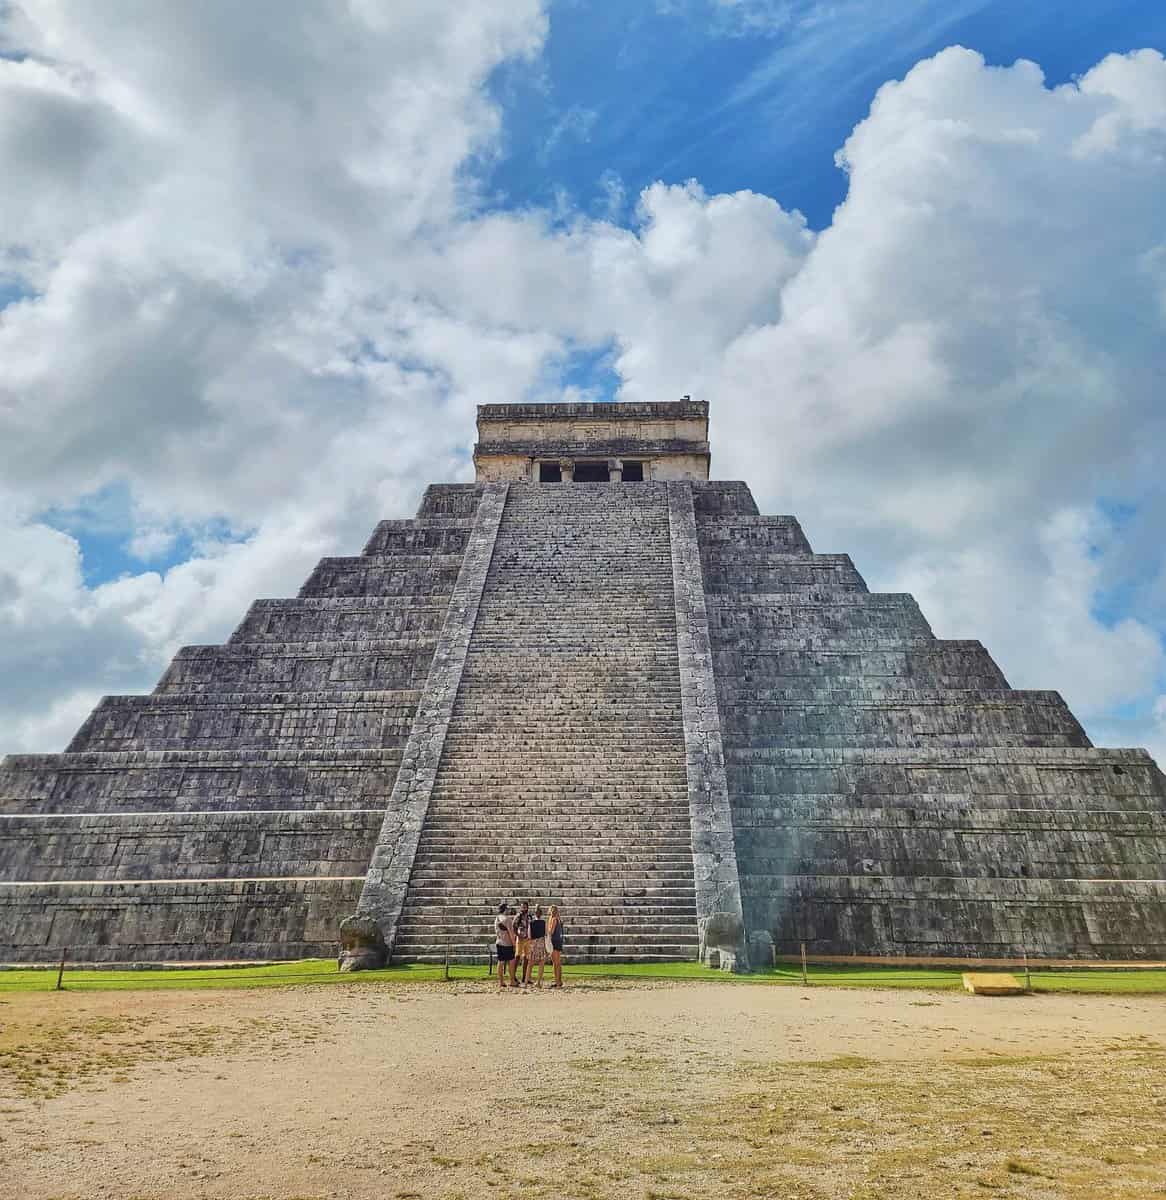 A group of people standing in front of the pyramid of El Castillo at Chichen Itza in Mexico under a partly cloudy sky.